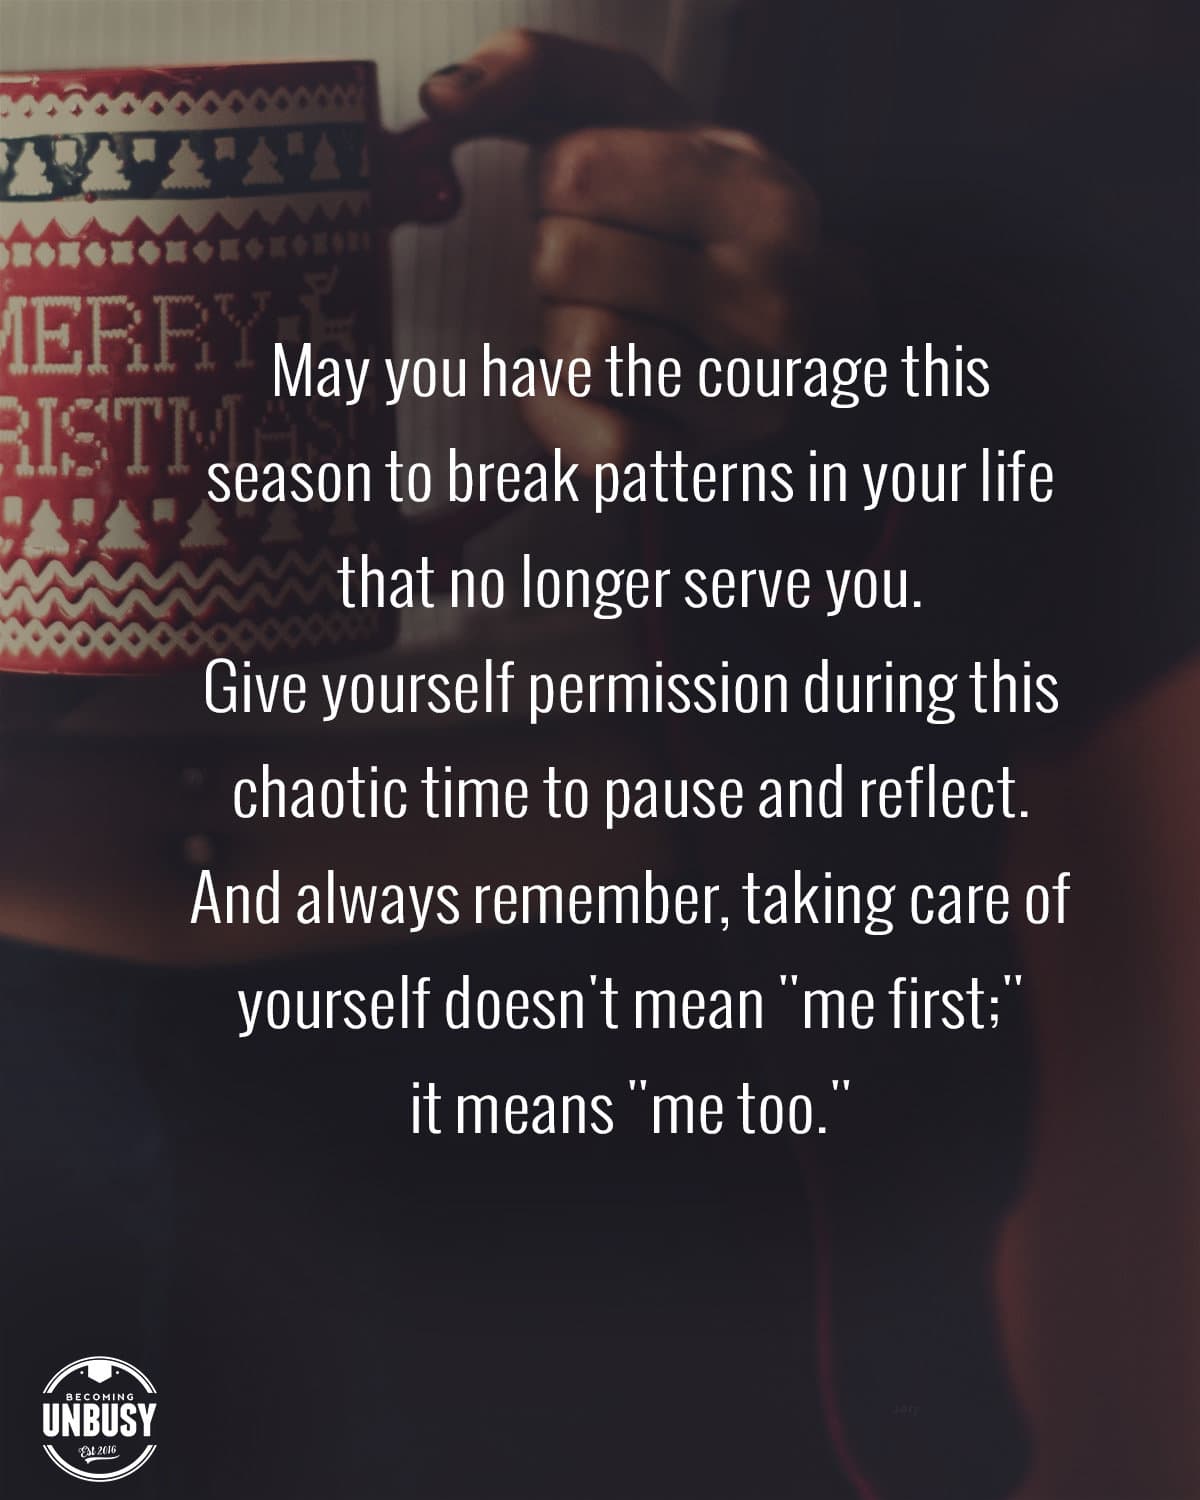 A photo of a woman holding a holiday coffee mug with the following quote overtop the image, "May you have the courage this season to break the patterns in life your life that are no longer serving you. Give yourself permission during this chaotic time to pause and reflect. And always remember, taking care of yourself doesn't mean "me first;" it means "me too.""